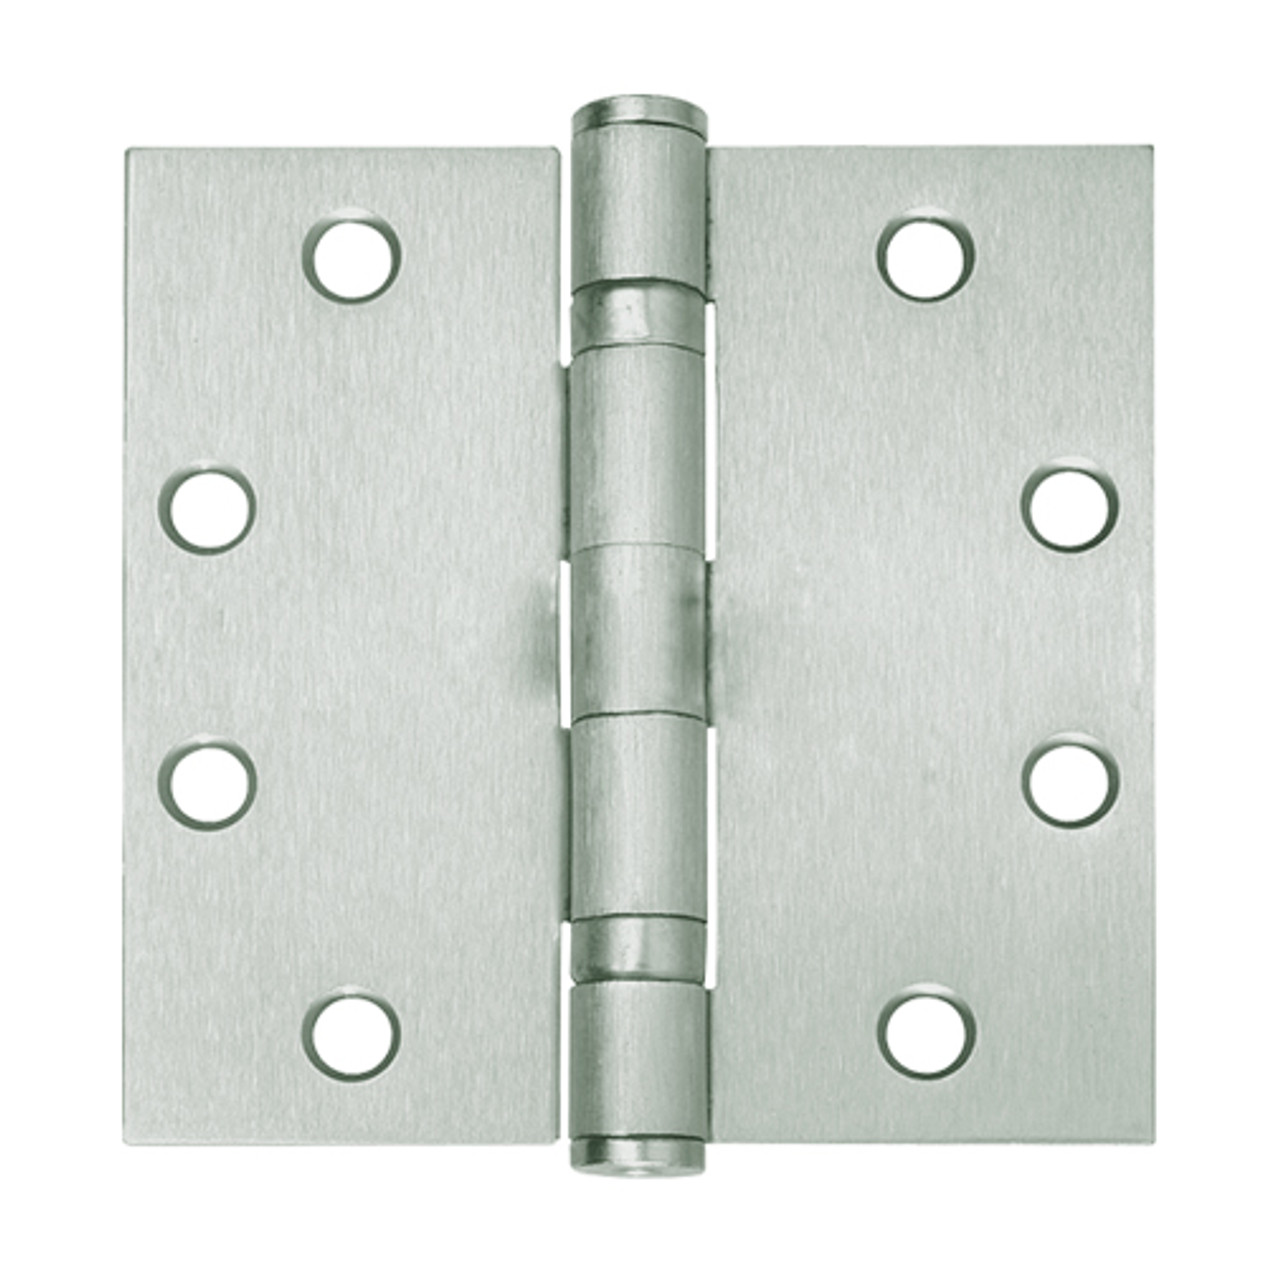 5BB1-4-5x4-619-TW8 IVES 5 Knuckle Ball Bearing Full Mortise Hinge with Electric Thru-Wire in Satin Nickel